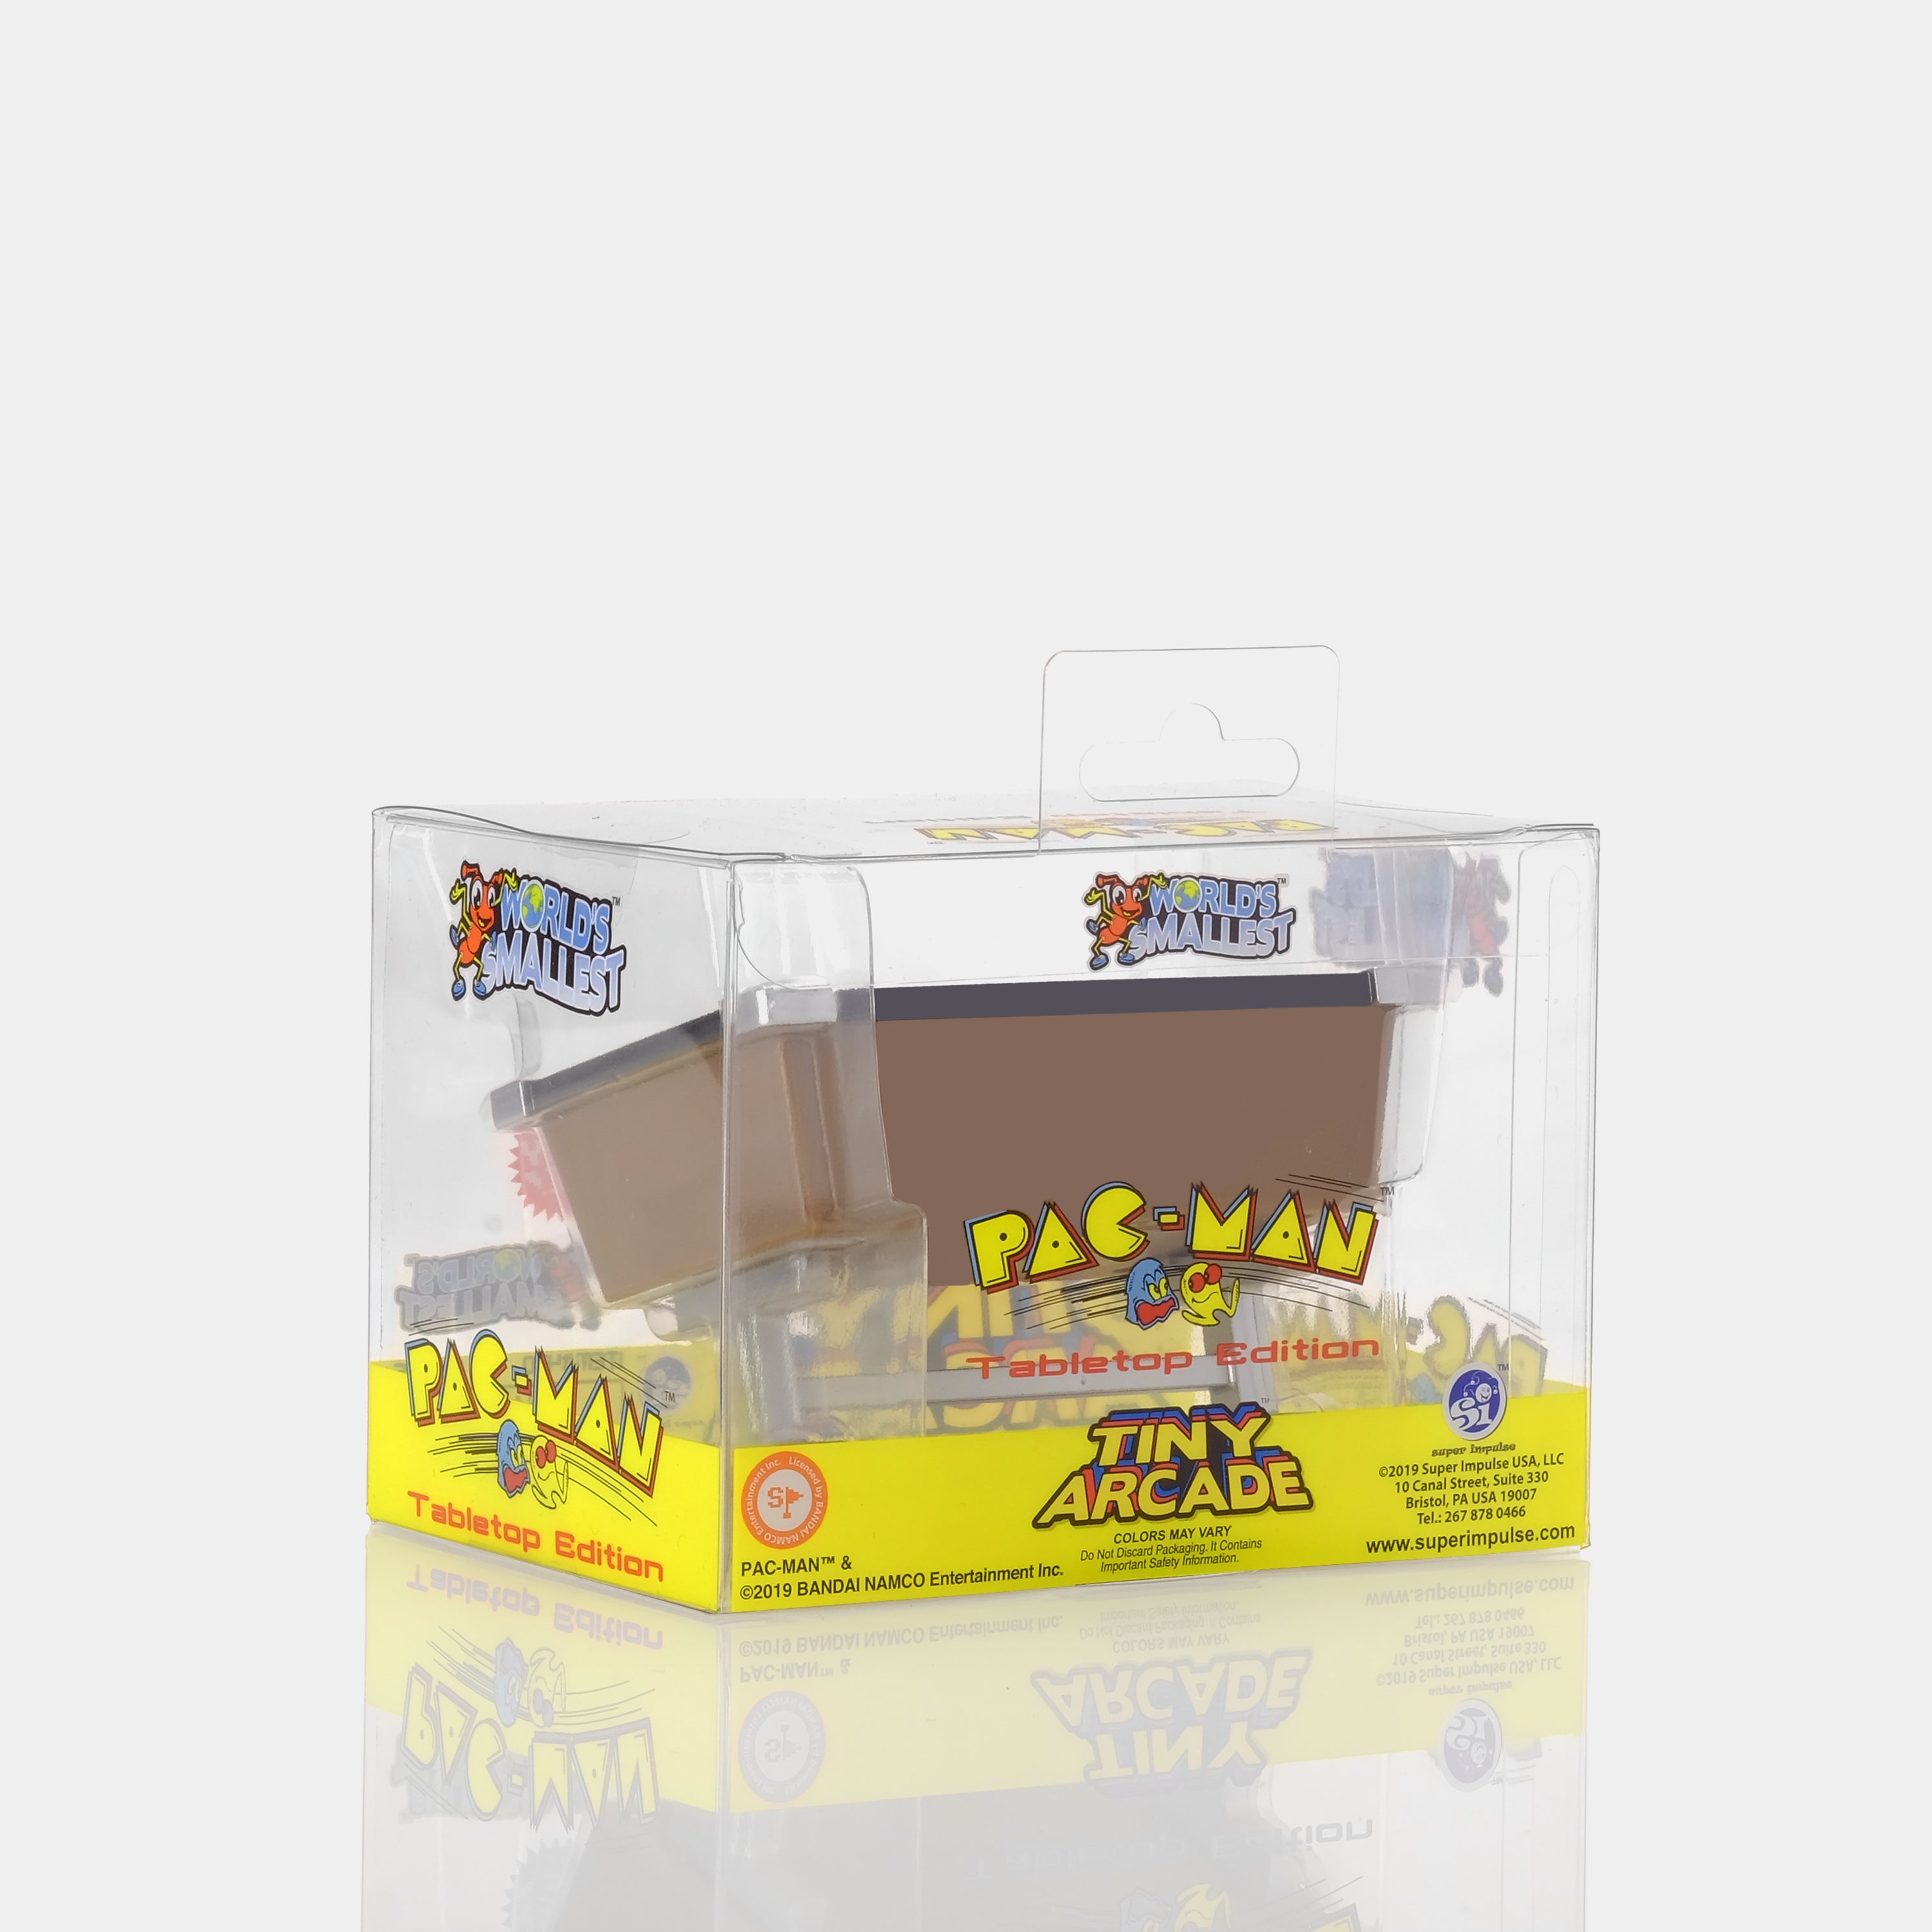 Tiny Arcade Pac-Man Tabletop Edition Game